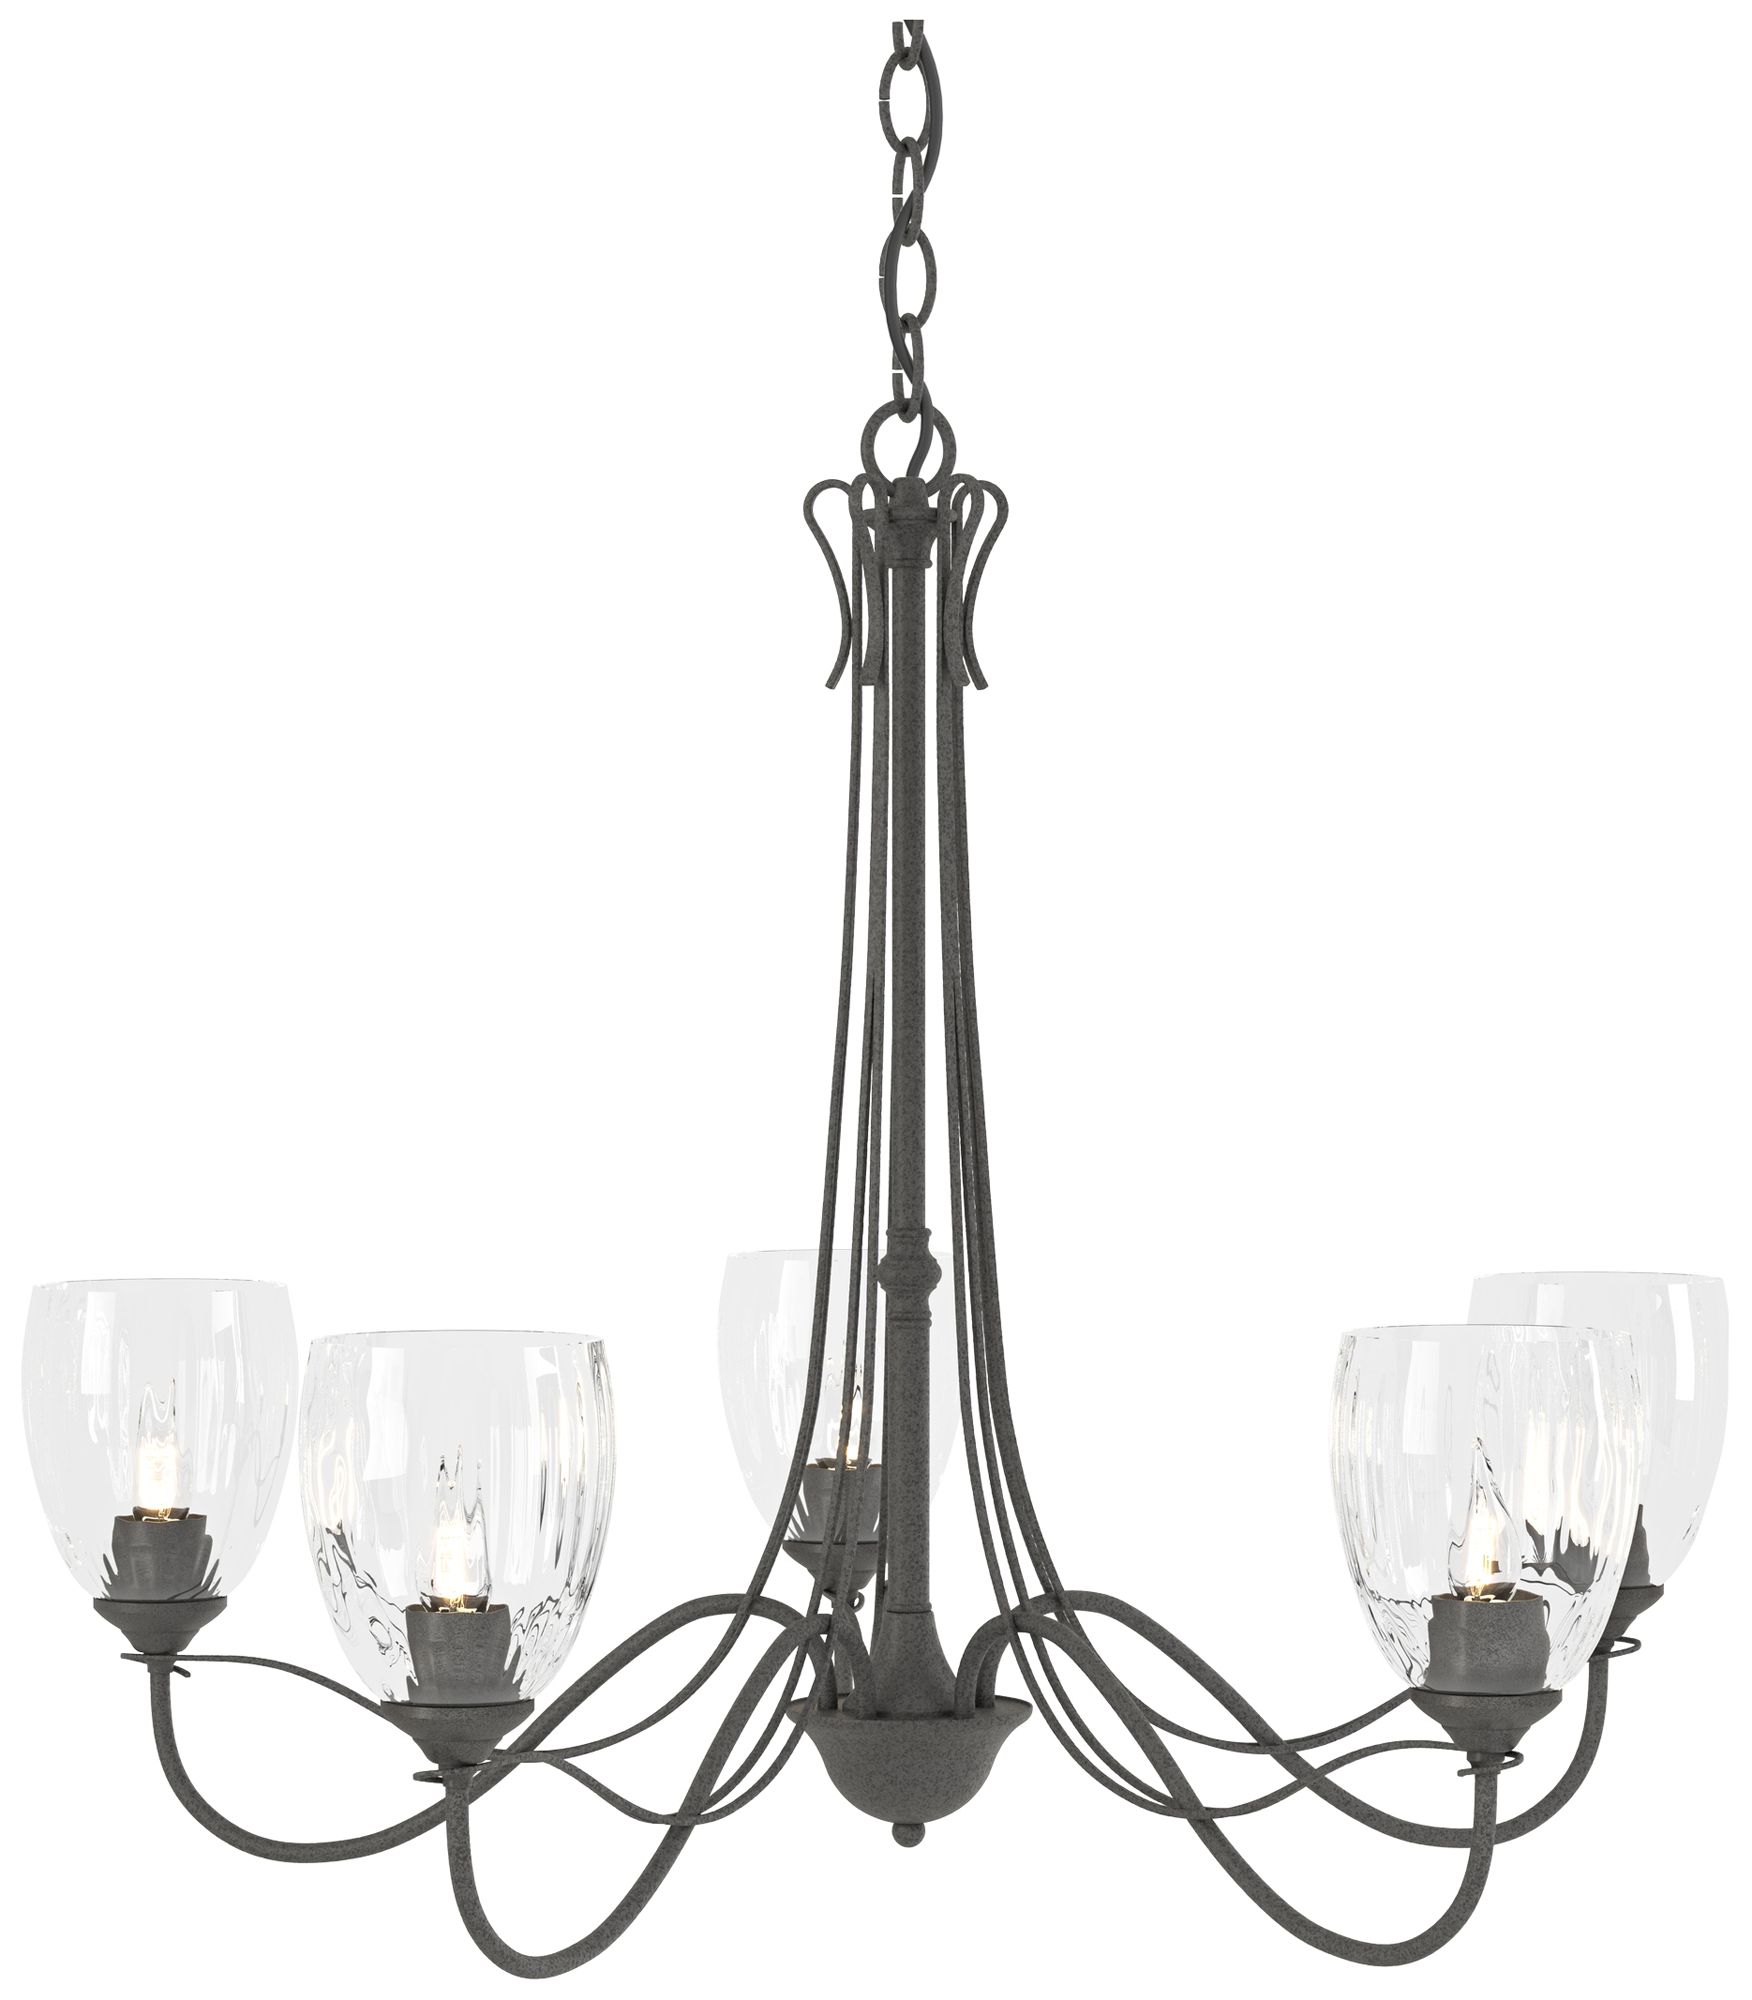 Trellis 28.1" Wide 5 Arm Natural Iron Chandelier With Water Glass